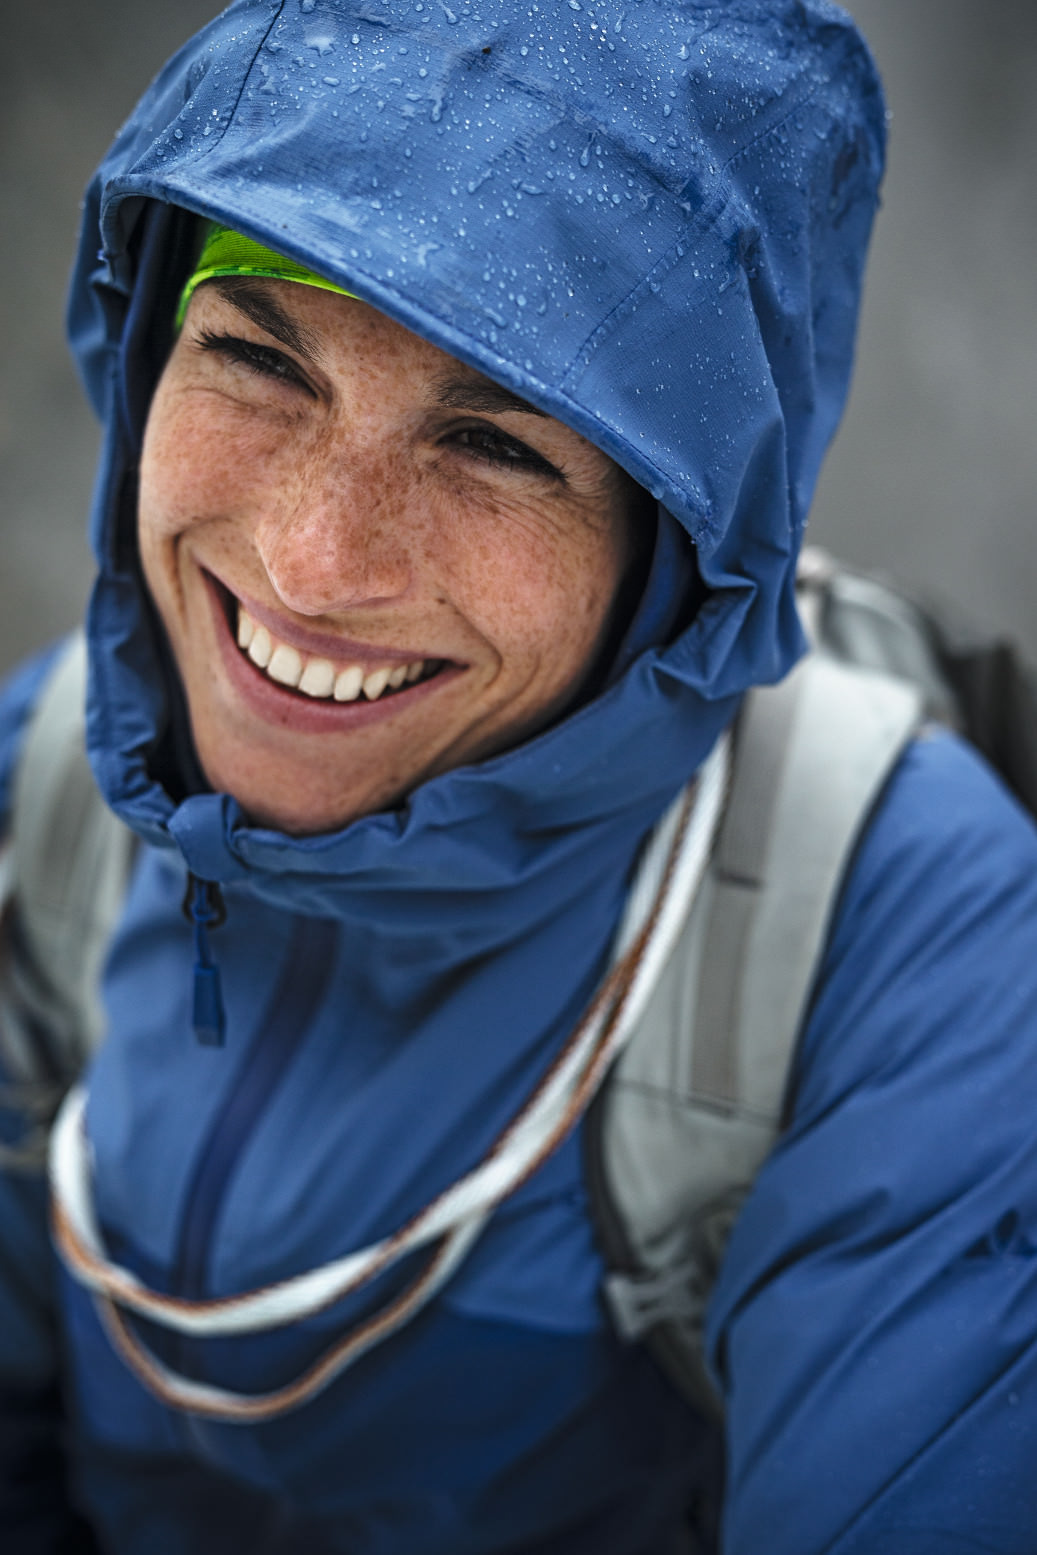 For years now, VAUDE has refrained from using PFC for its waterproof membranes.